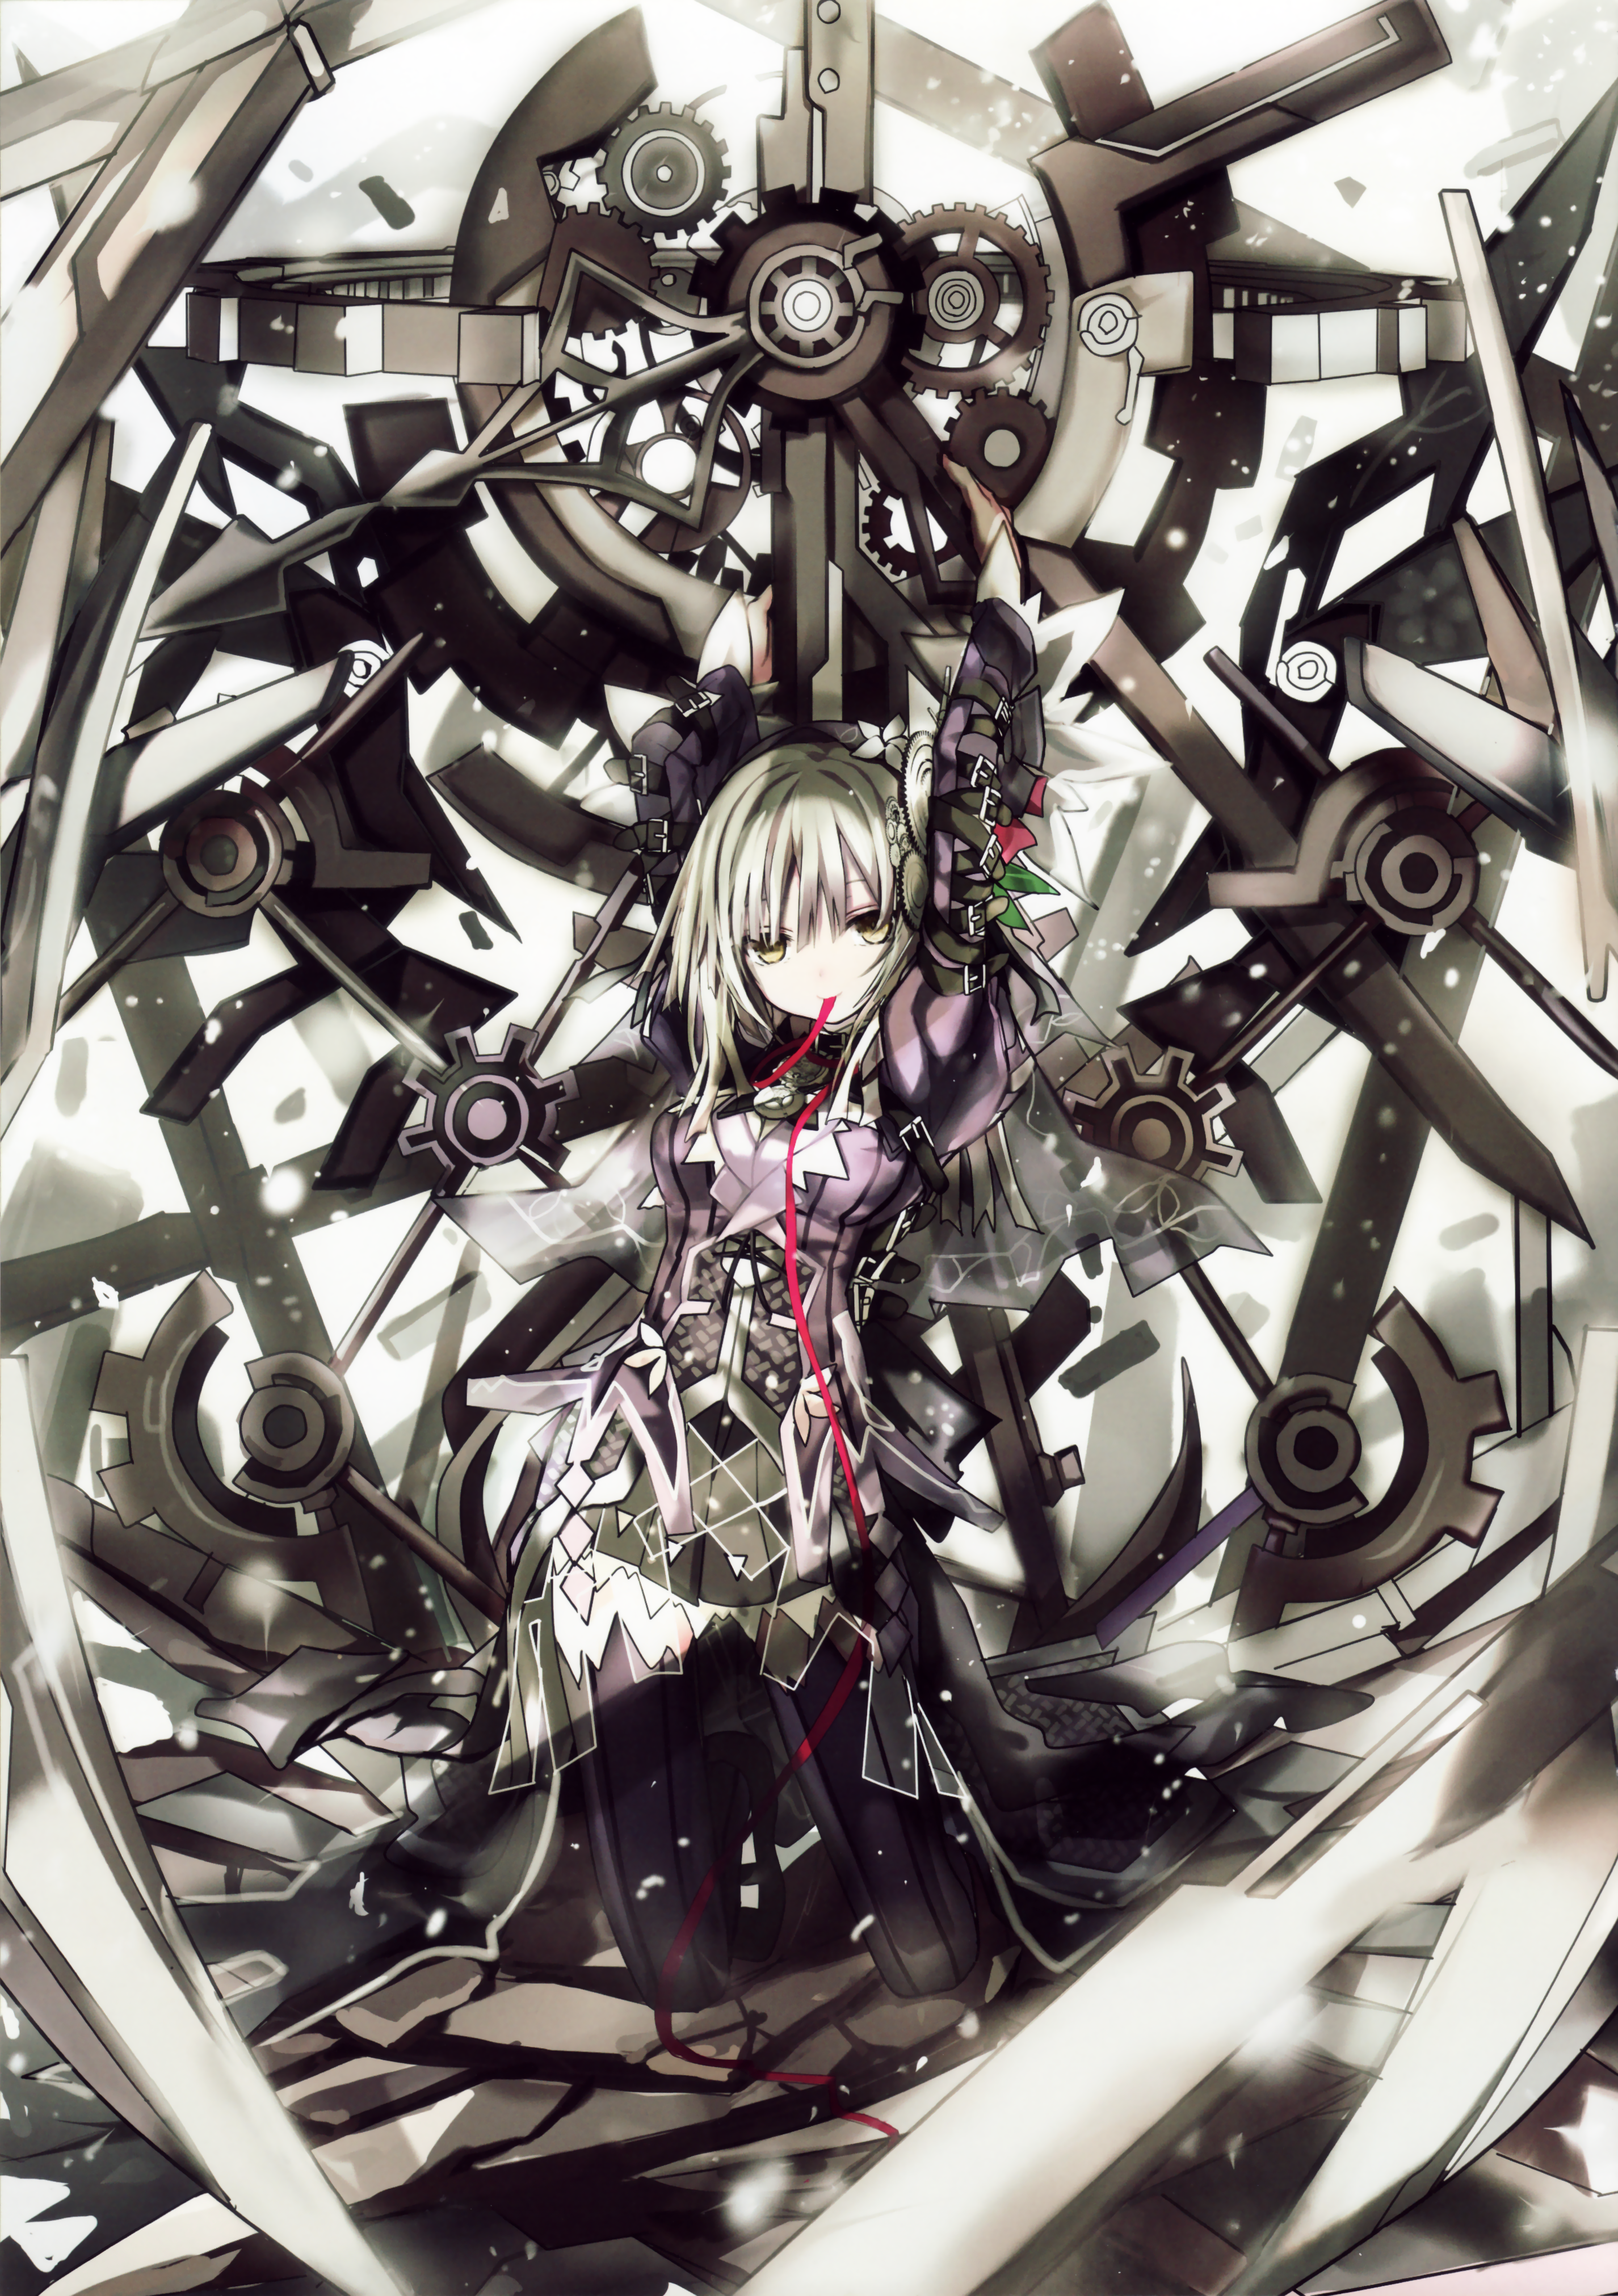 Clockwork Planet - Ryuzu and Anchor by Lelouch11 😂🤗😏 | Facebook